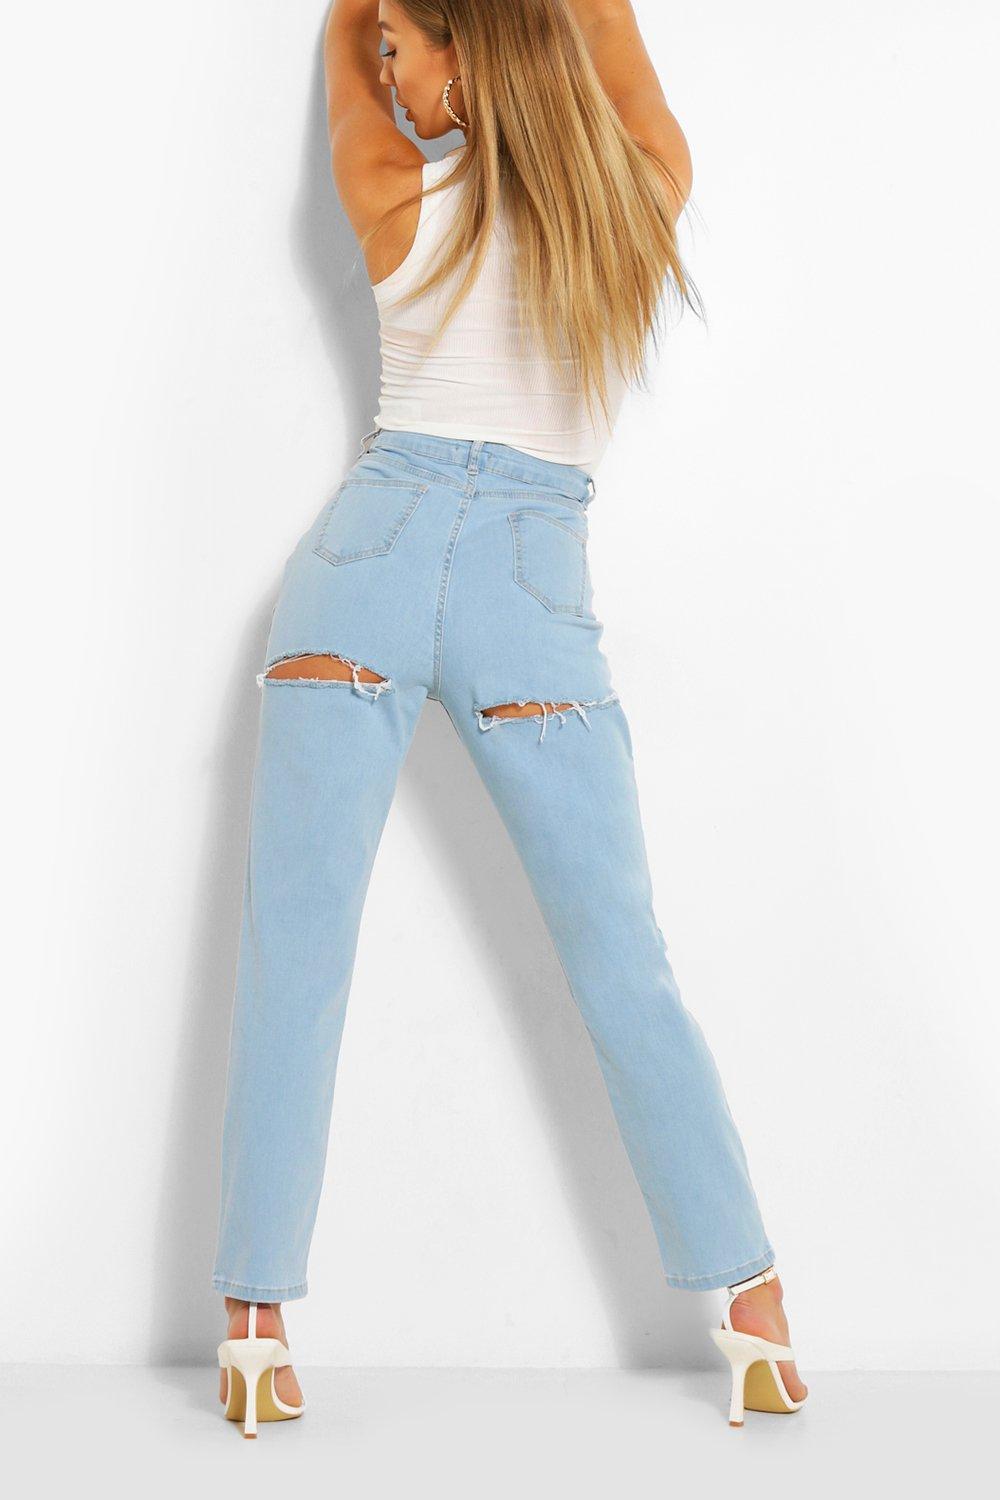 jeans with rips on the back